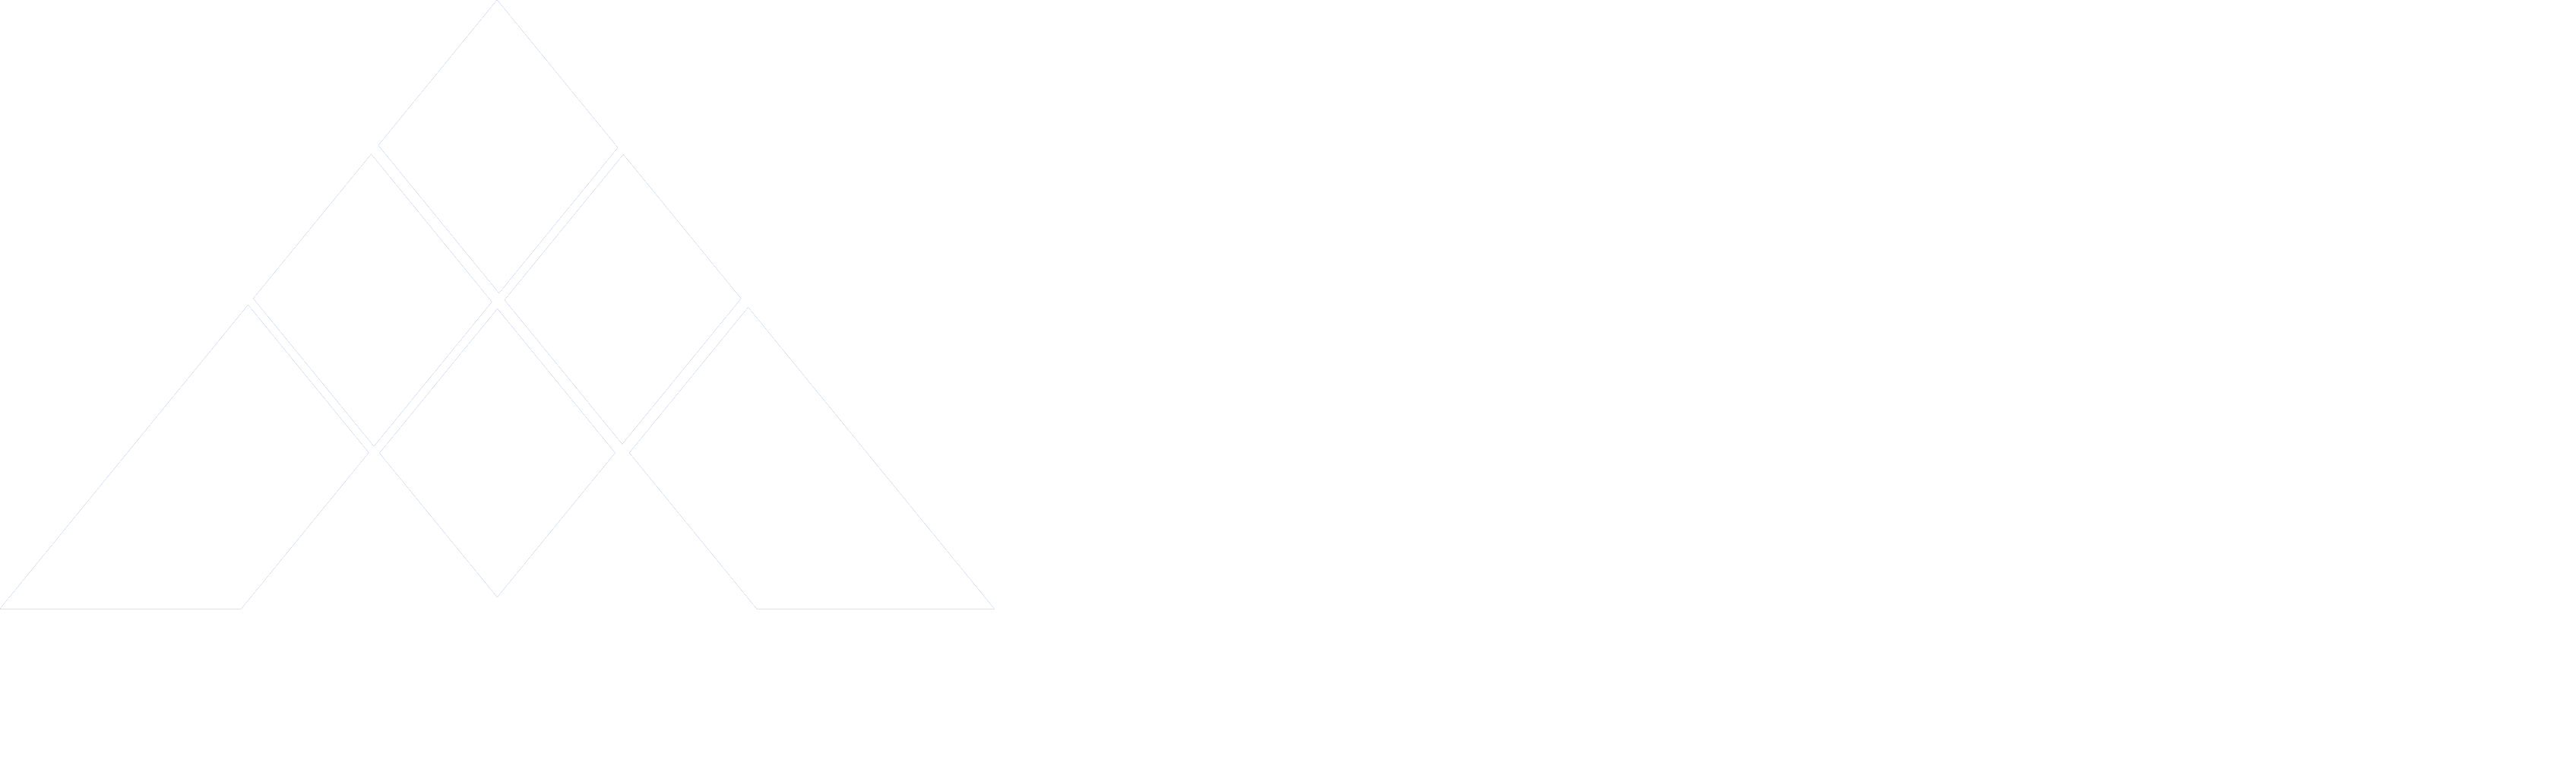 Rated Solution